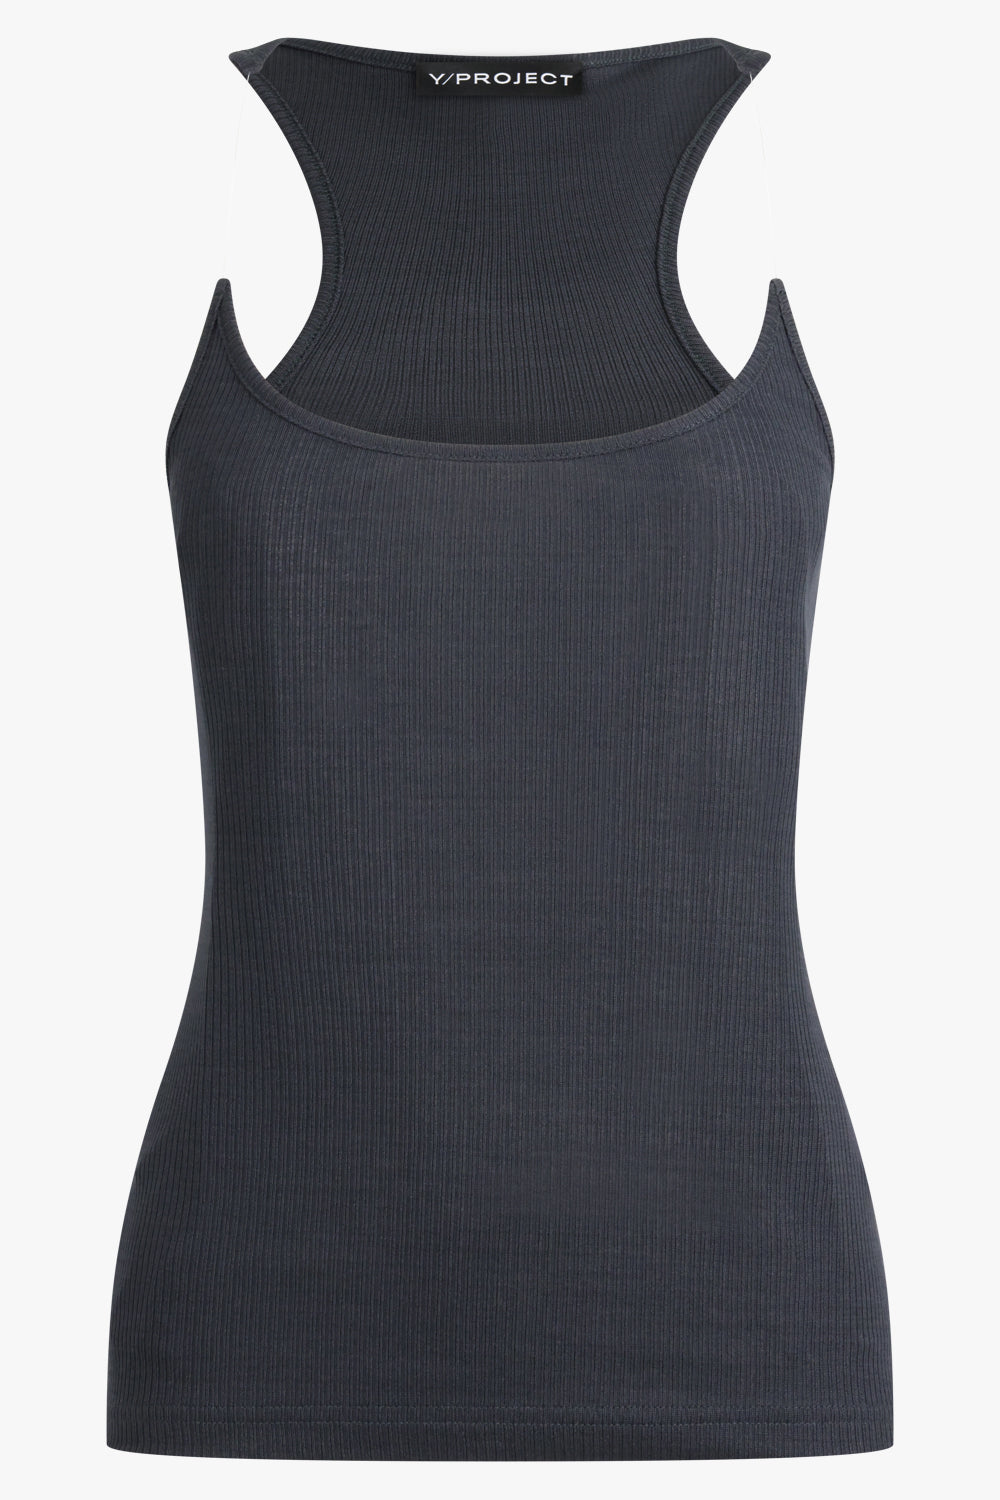 Y/PROJECT RTW Invisible Strap Tank Top | Vintage Black